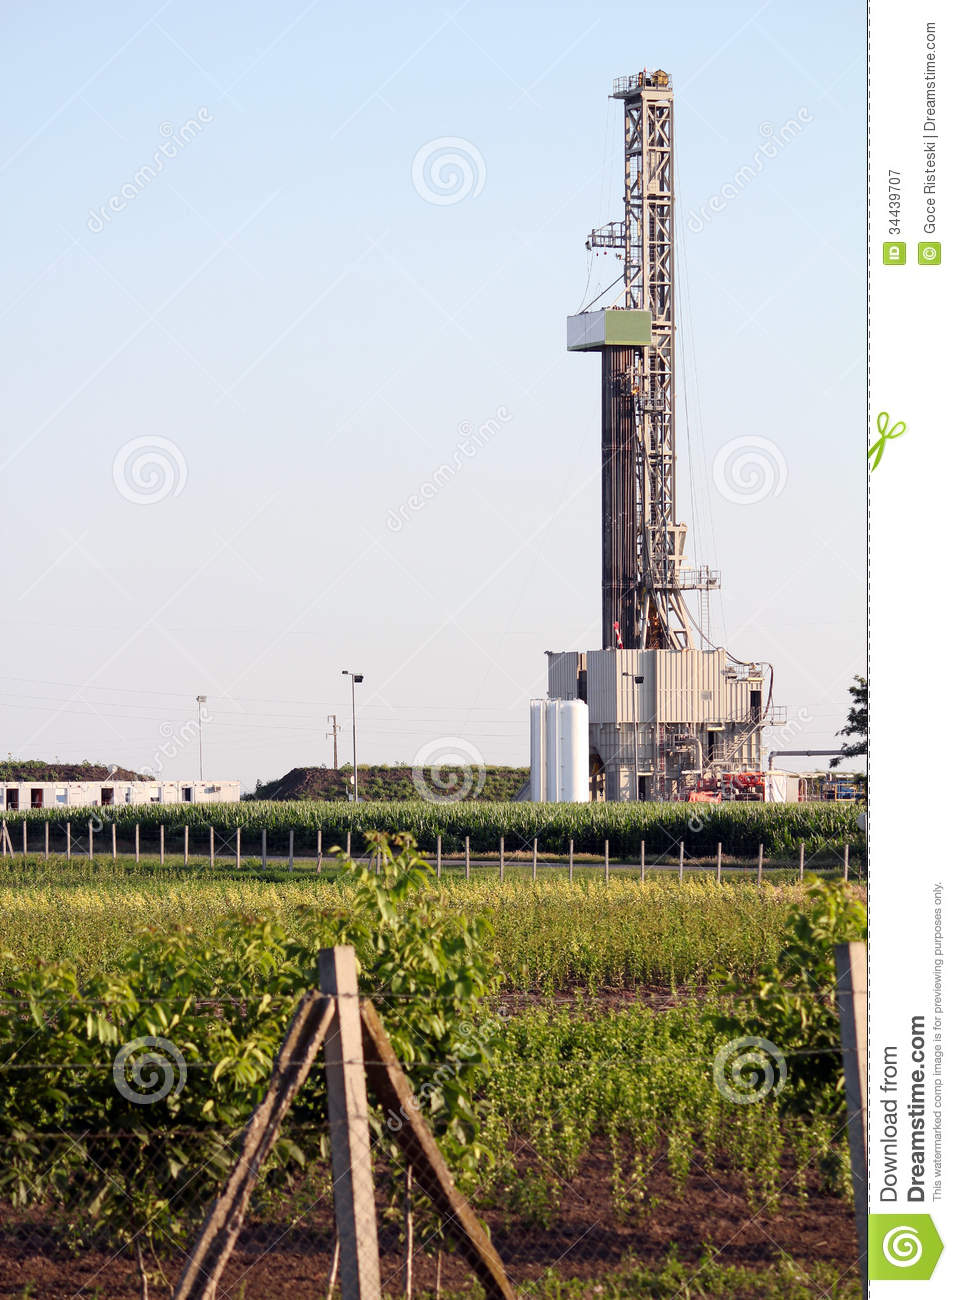 Oilfield With Oil Drilling Rig Royalty Free Stock Photography   Image